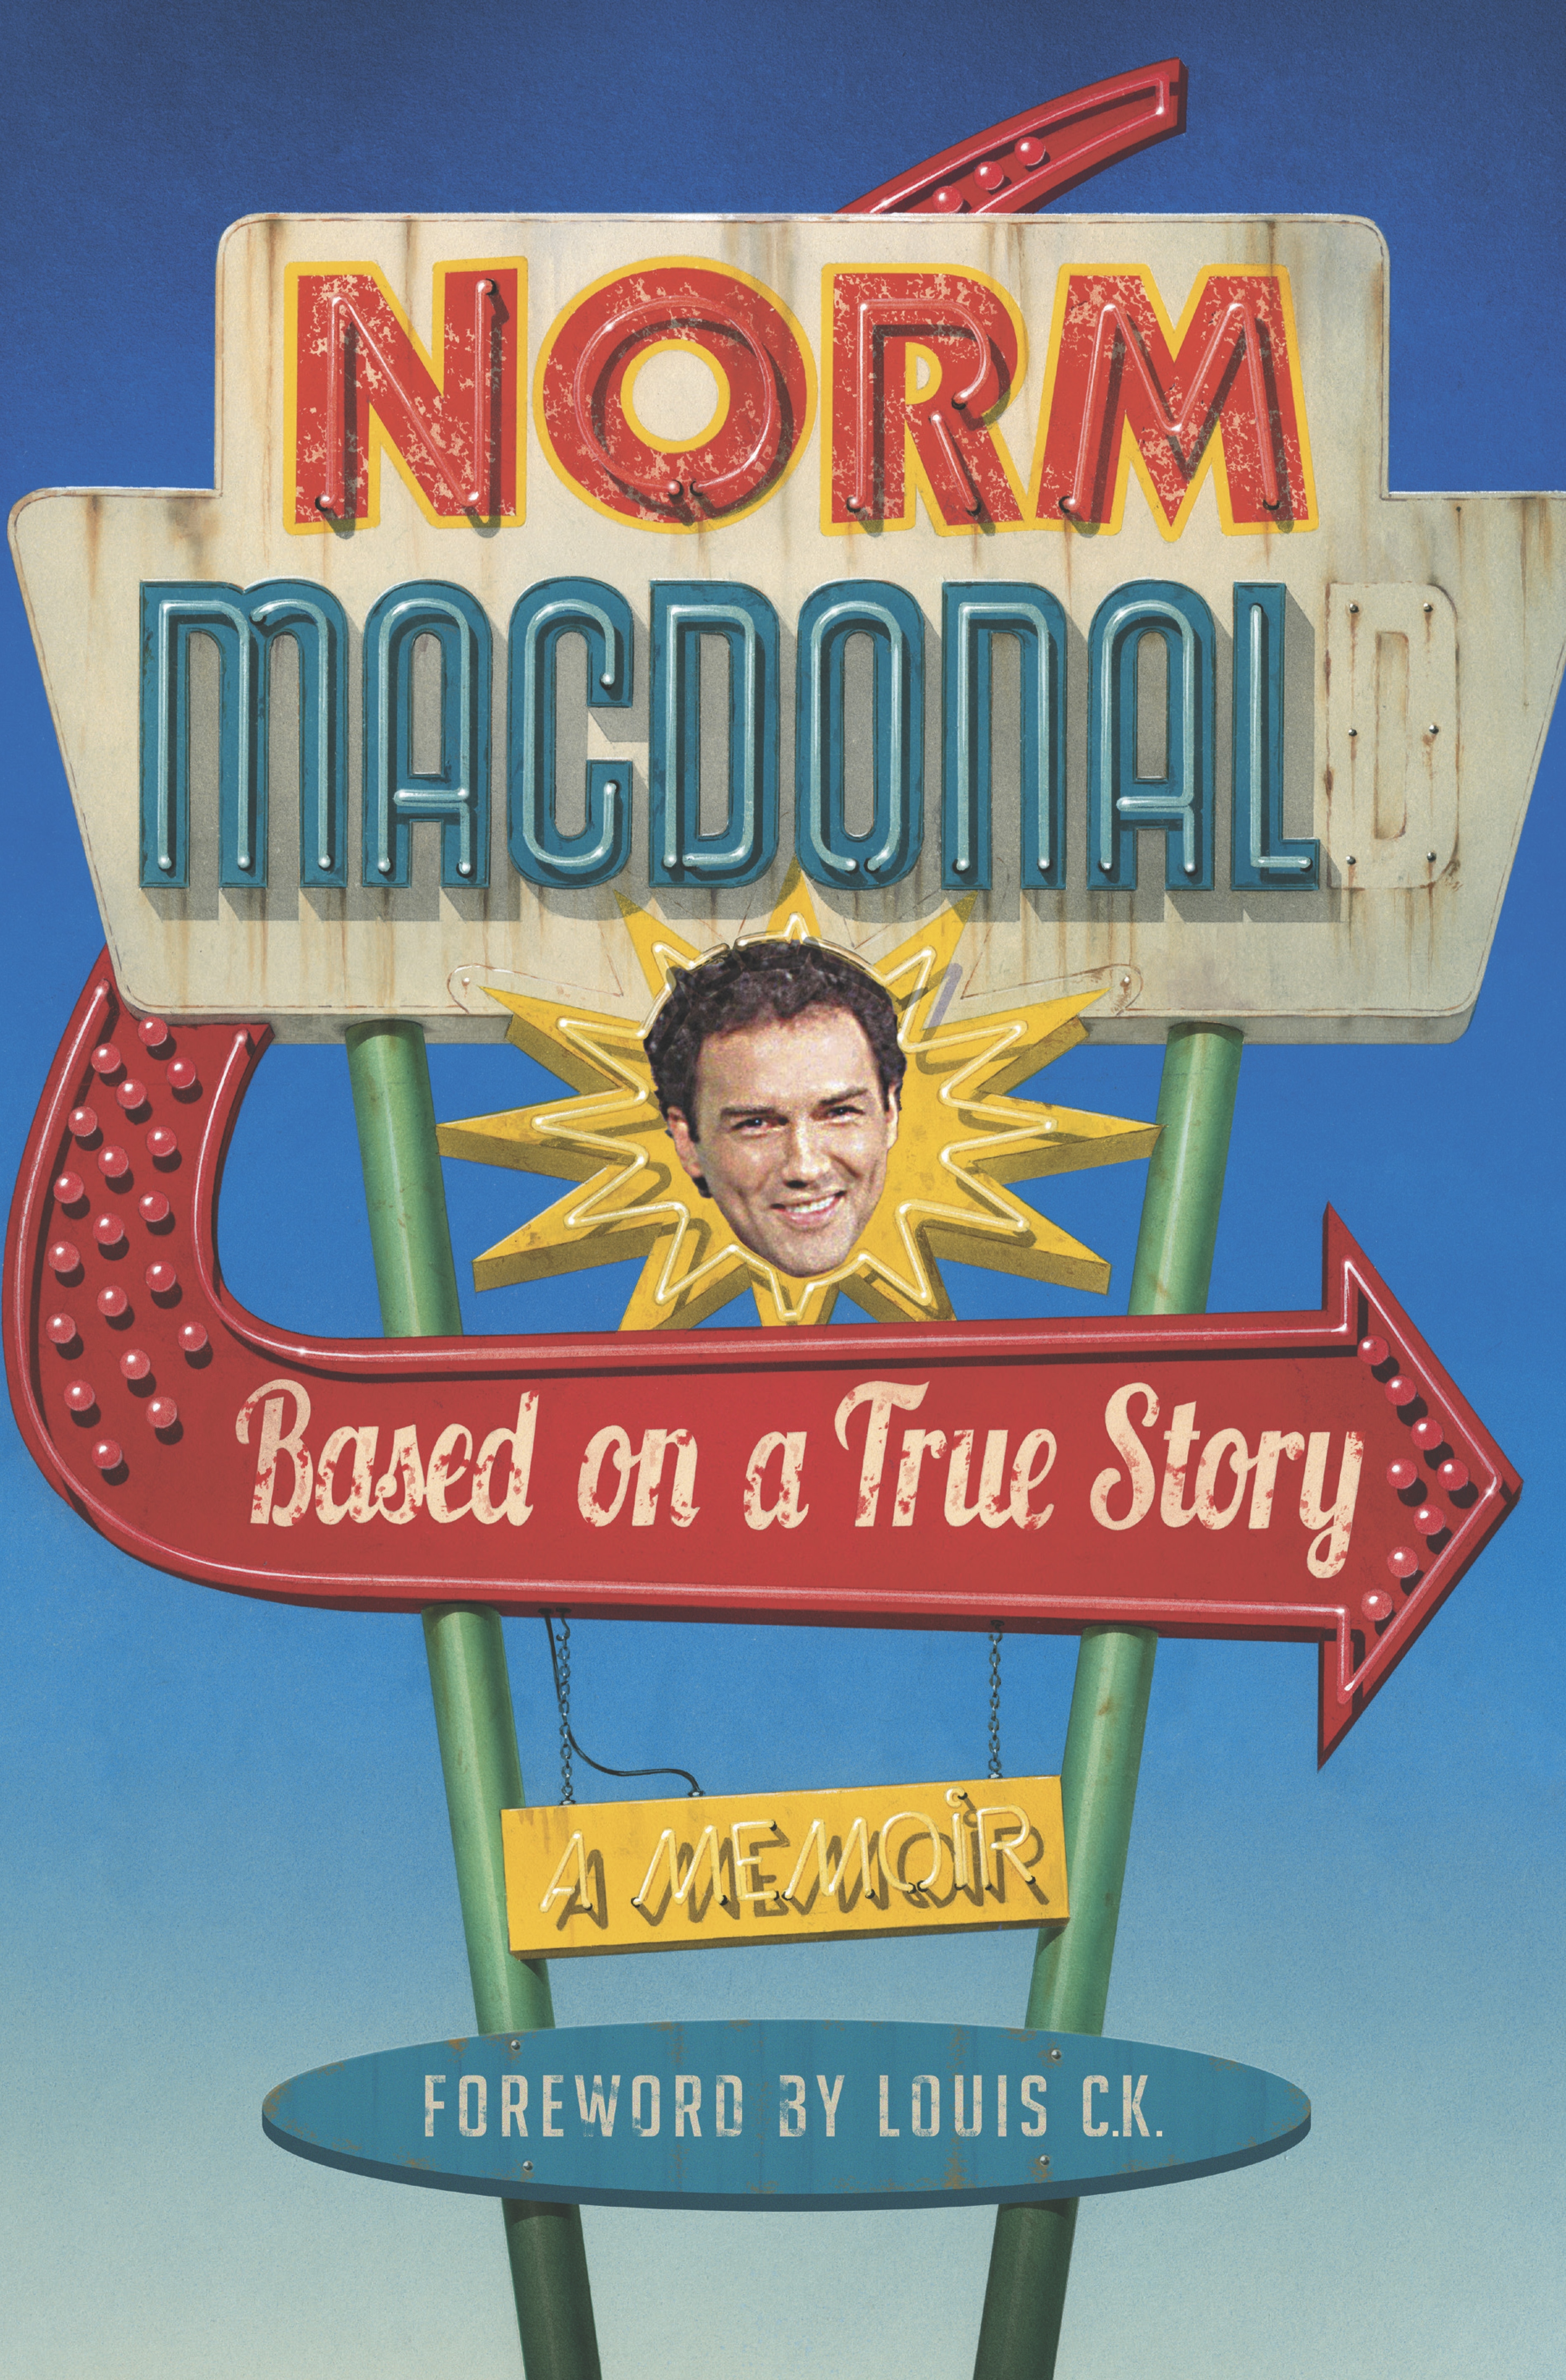 Book “Based on a True Story” by Norm Macdonald, Louis C.K.